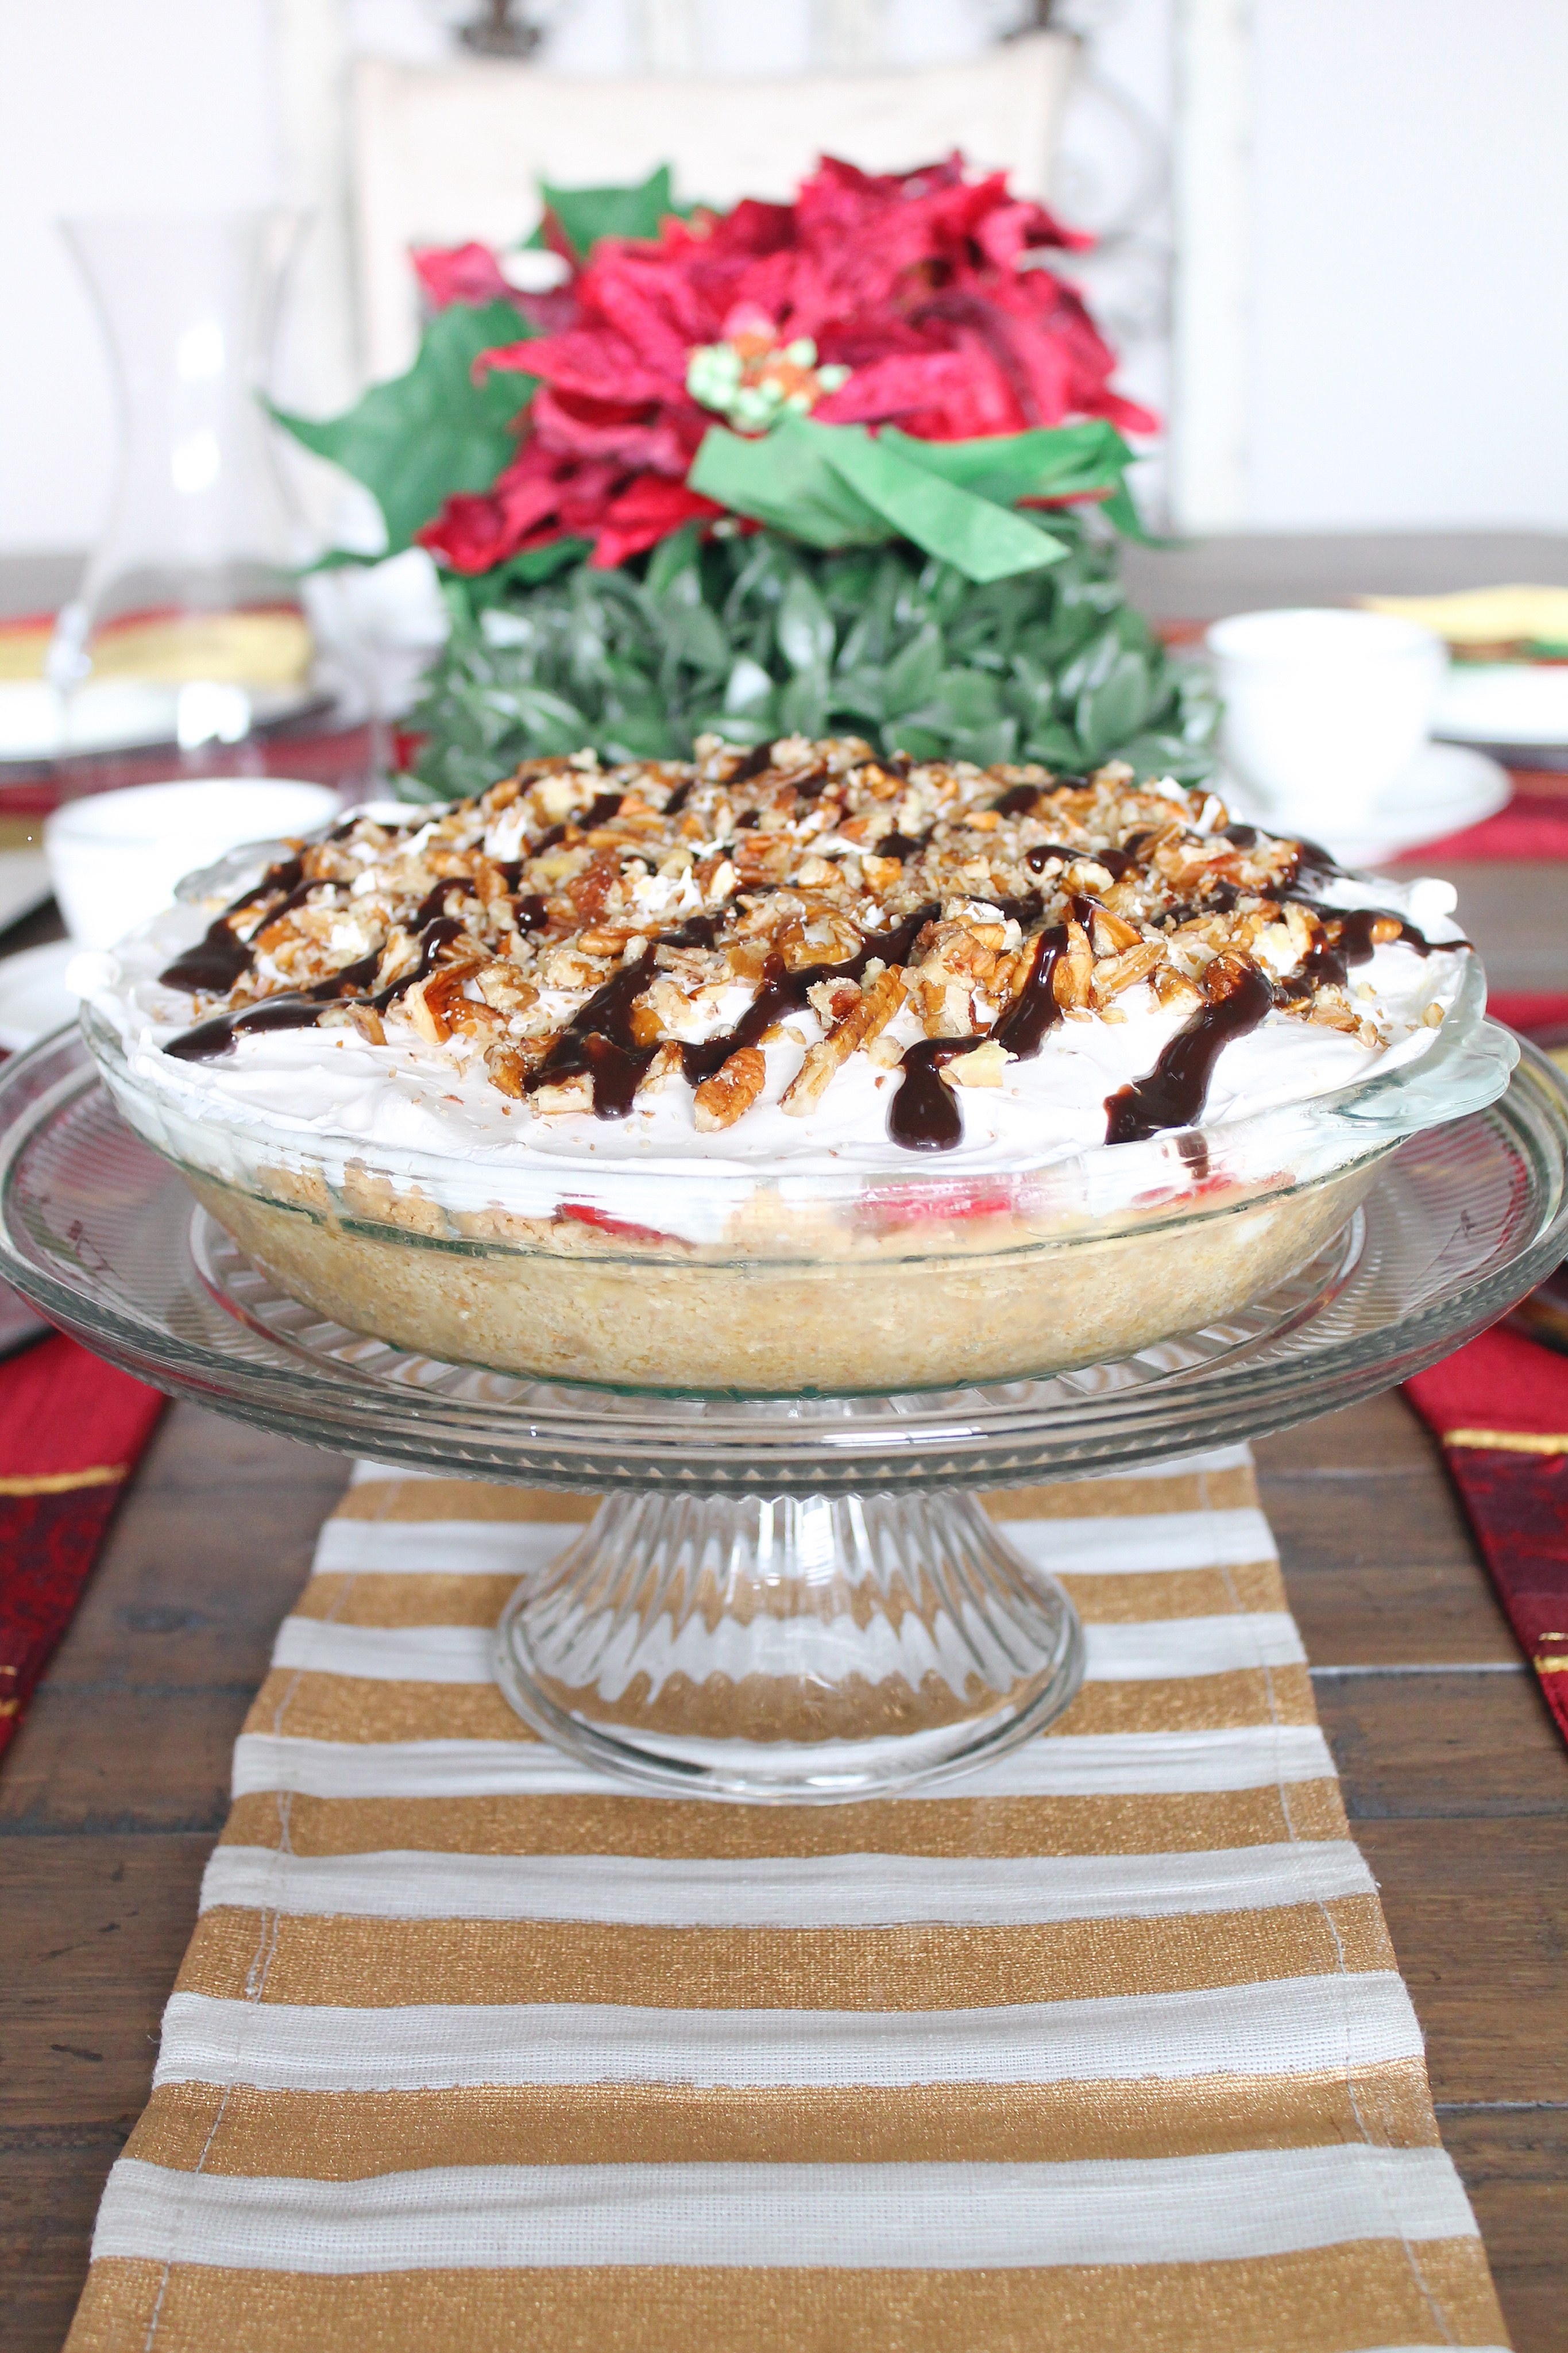 The yummiest no-bake banana split pie! La Lechera is our go-to brand for sweetened condensed milk, and this pie is so easy and delicious, you'll be so happy to share with your family! #AD #unidosconlalechera #unidoslalechera #nobakepie